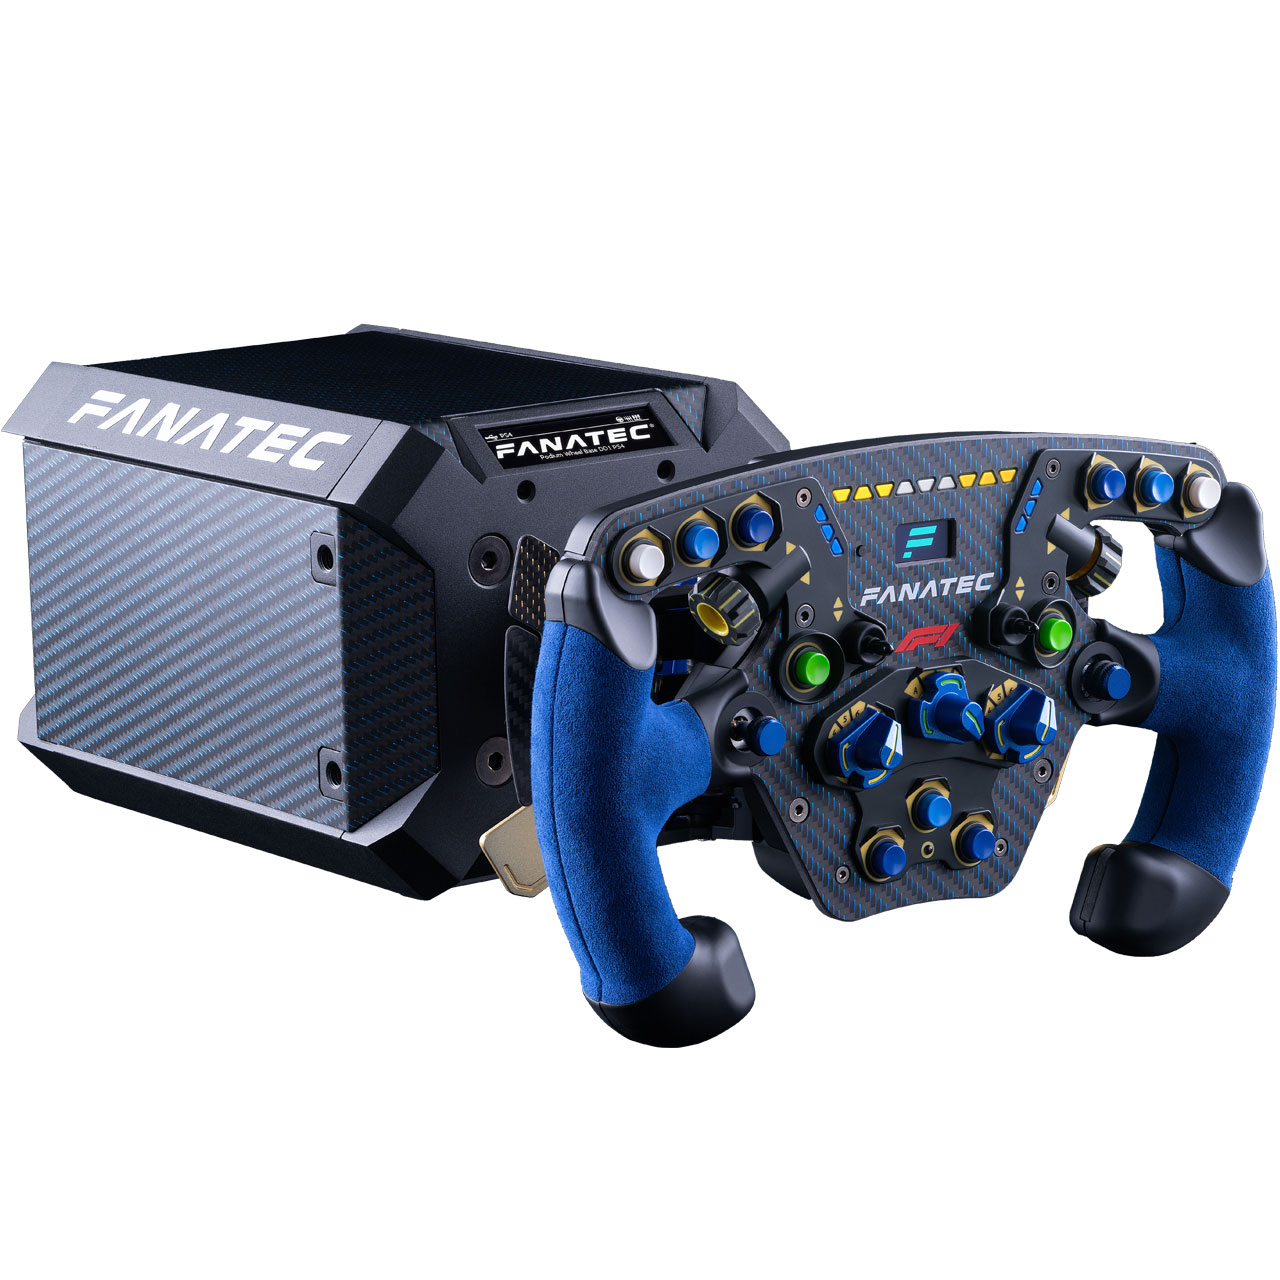 Citron Klage kan ikke se Podium Racing Wheel F1® - officially licenced for PS4™ | Fanatec